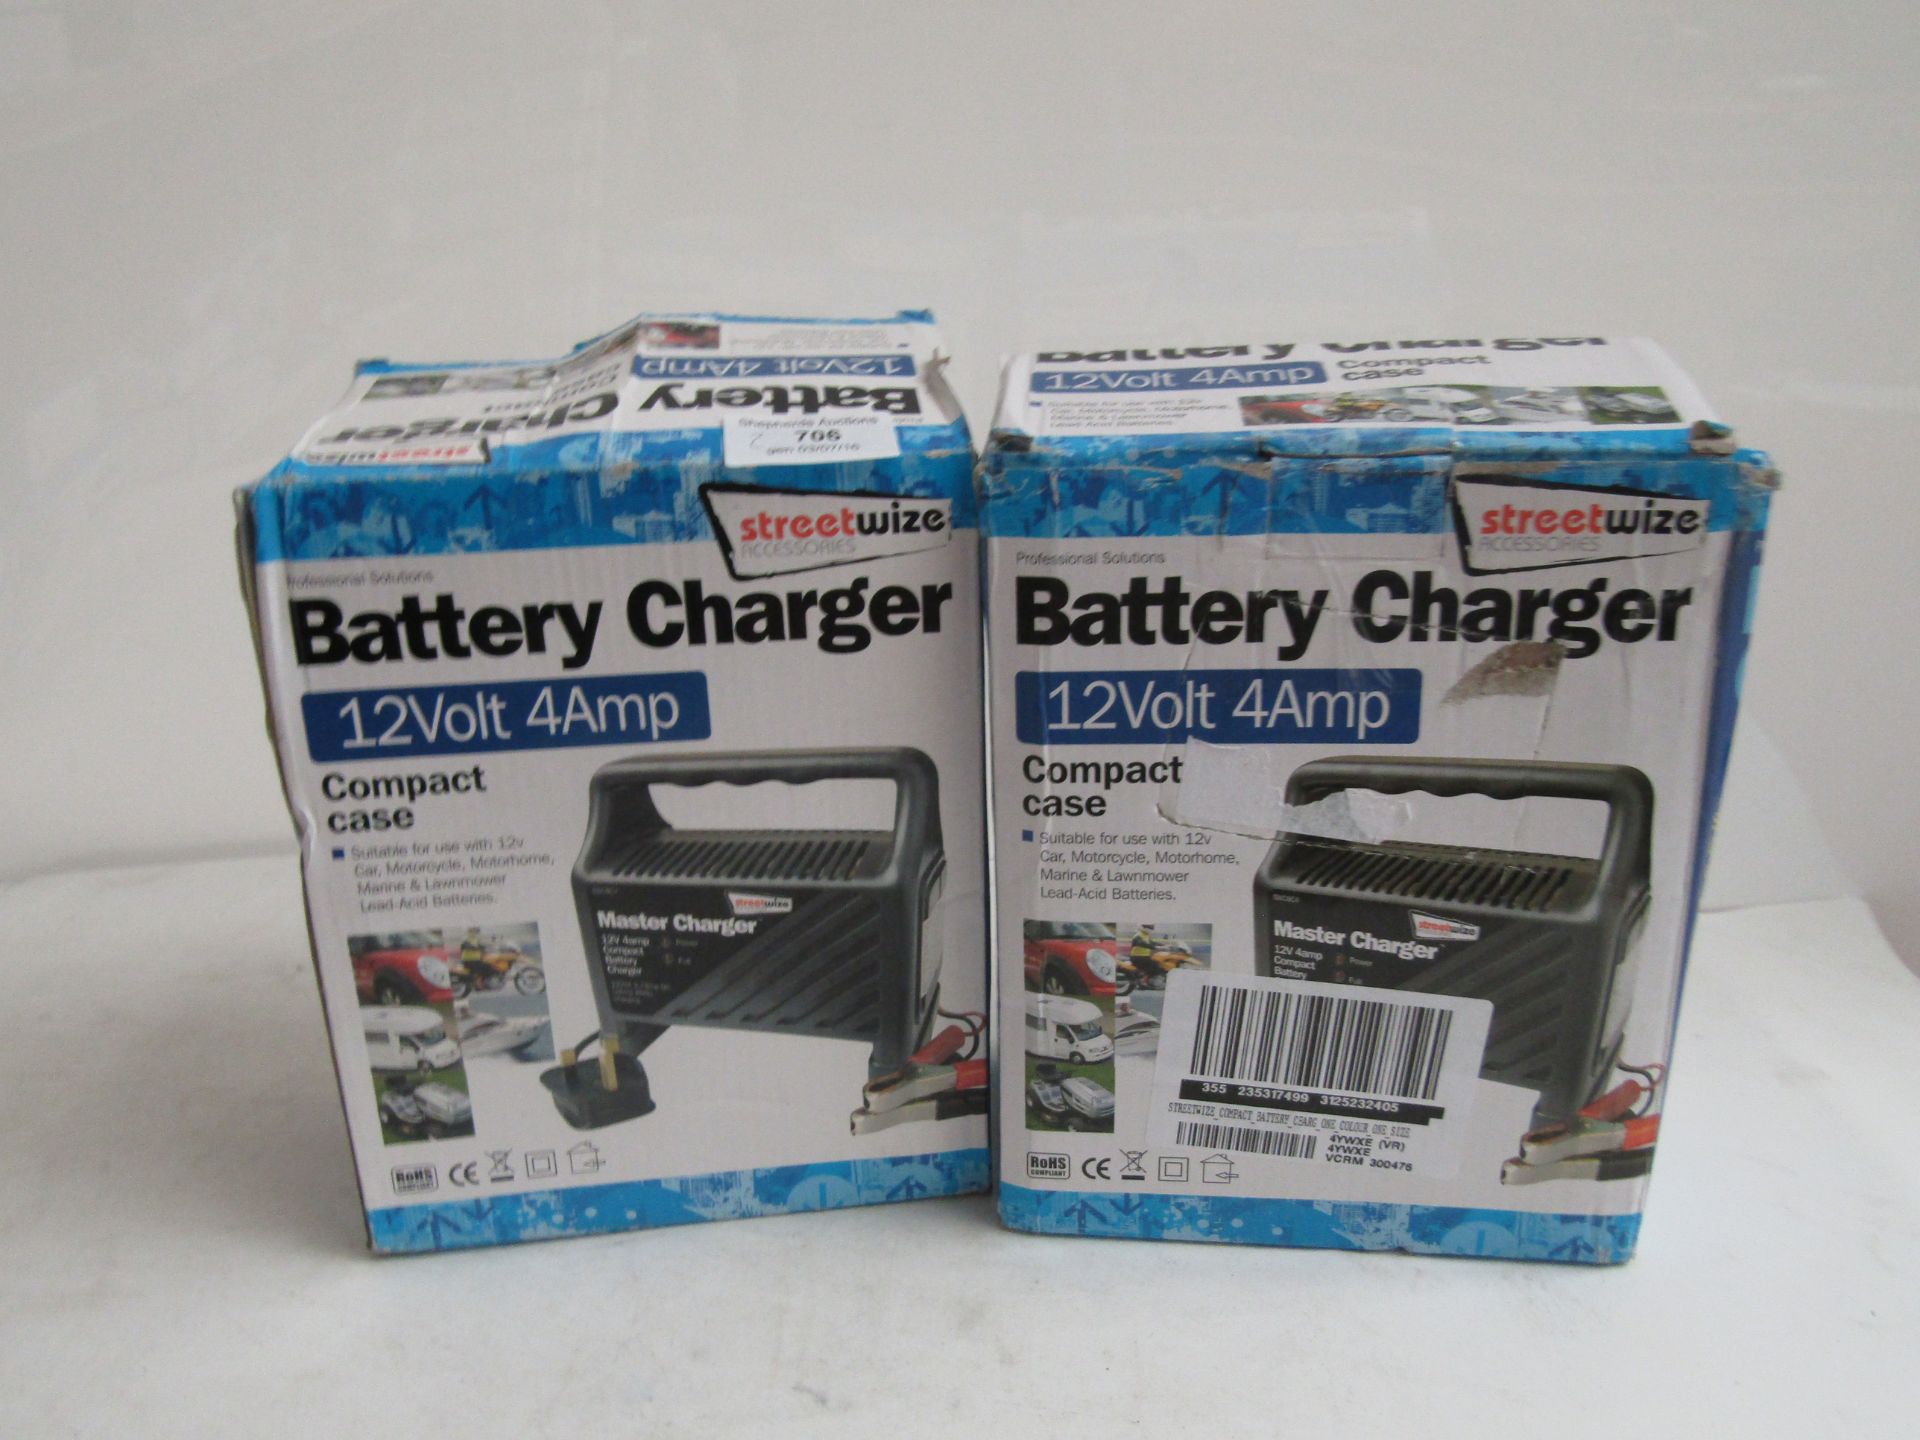 2x StreetWize 12V 4Amp Battery Chargers. Boxed.